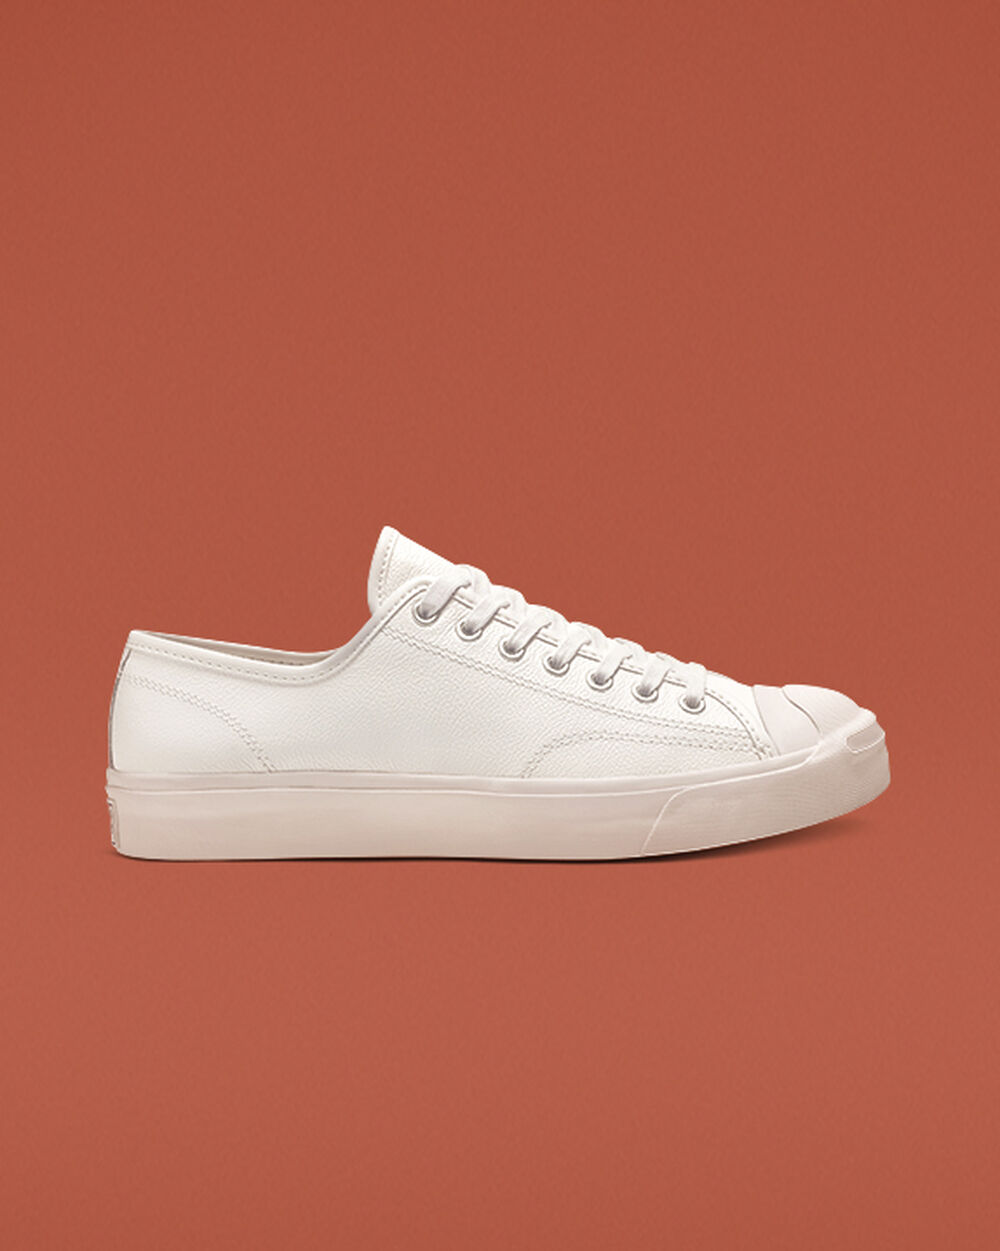 Tenis Converse Jack Purcell Mujer Blancos Blancos | Mexico-267146